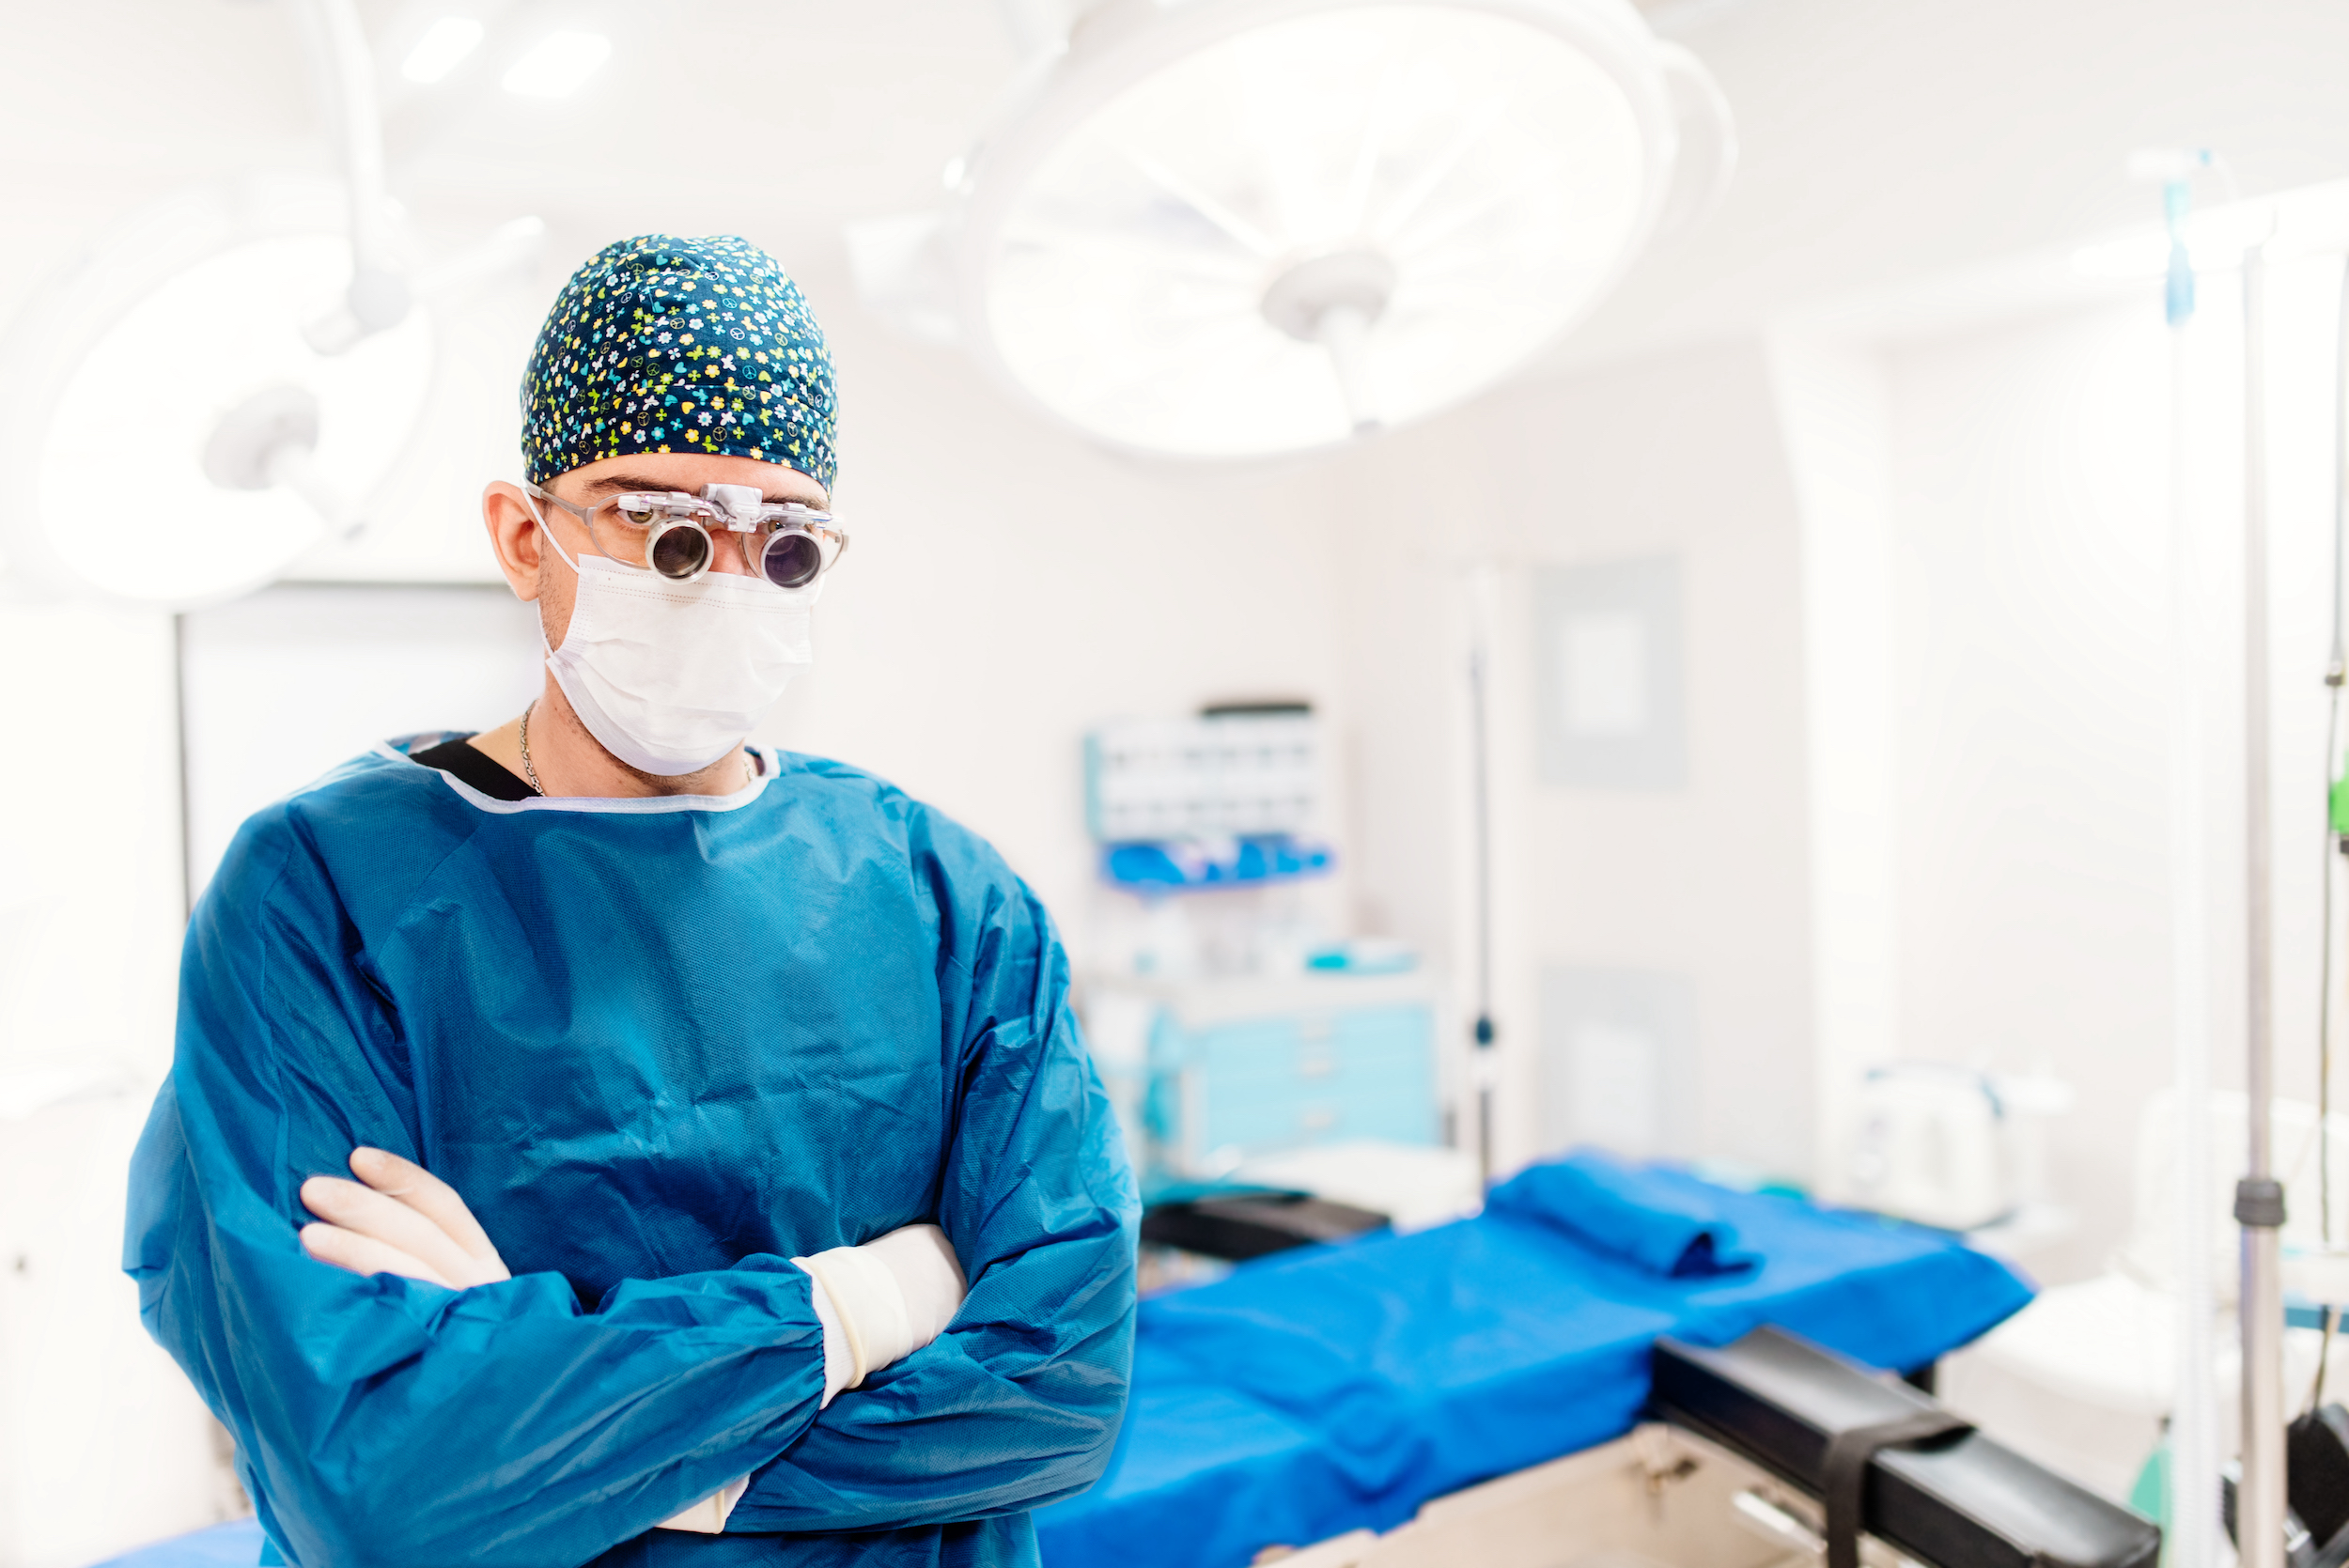 Doctors and plastic consultants: excessive cosmetic surgery backfires